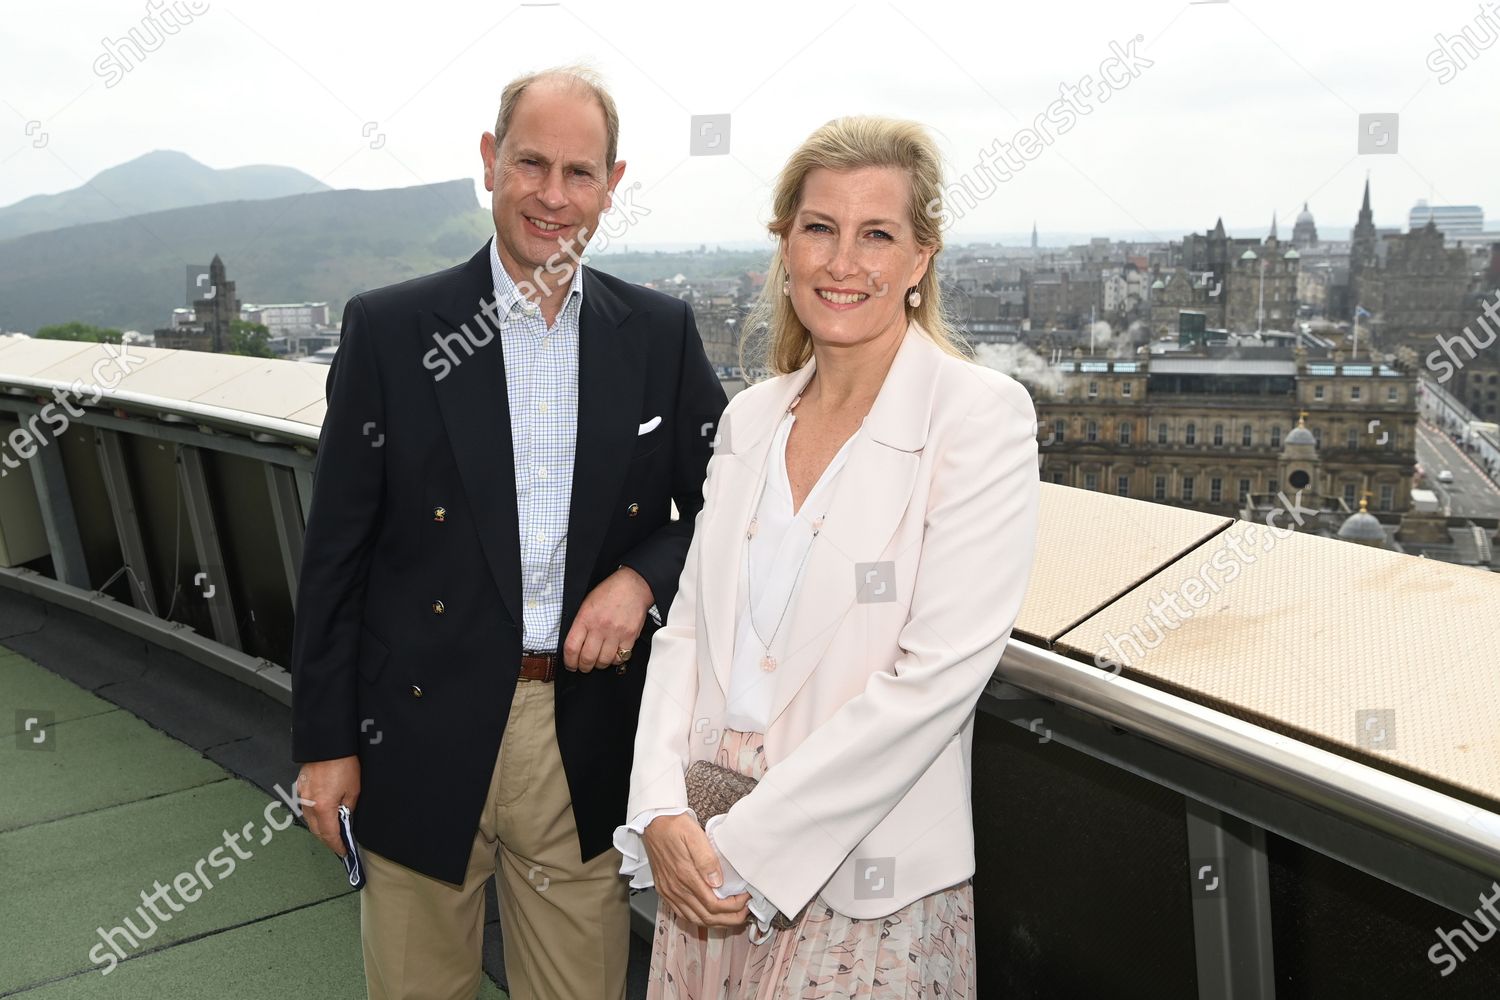 CASA REAL BRITÁNICA - Página 77 Prince-edward-and-sophie-countess-of-wessex-visit-to-edinburgh-scotland-uk-shutterstock-editorial-12173651as